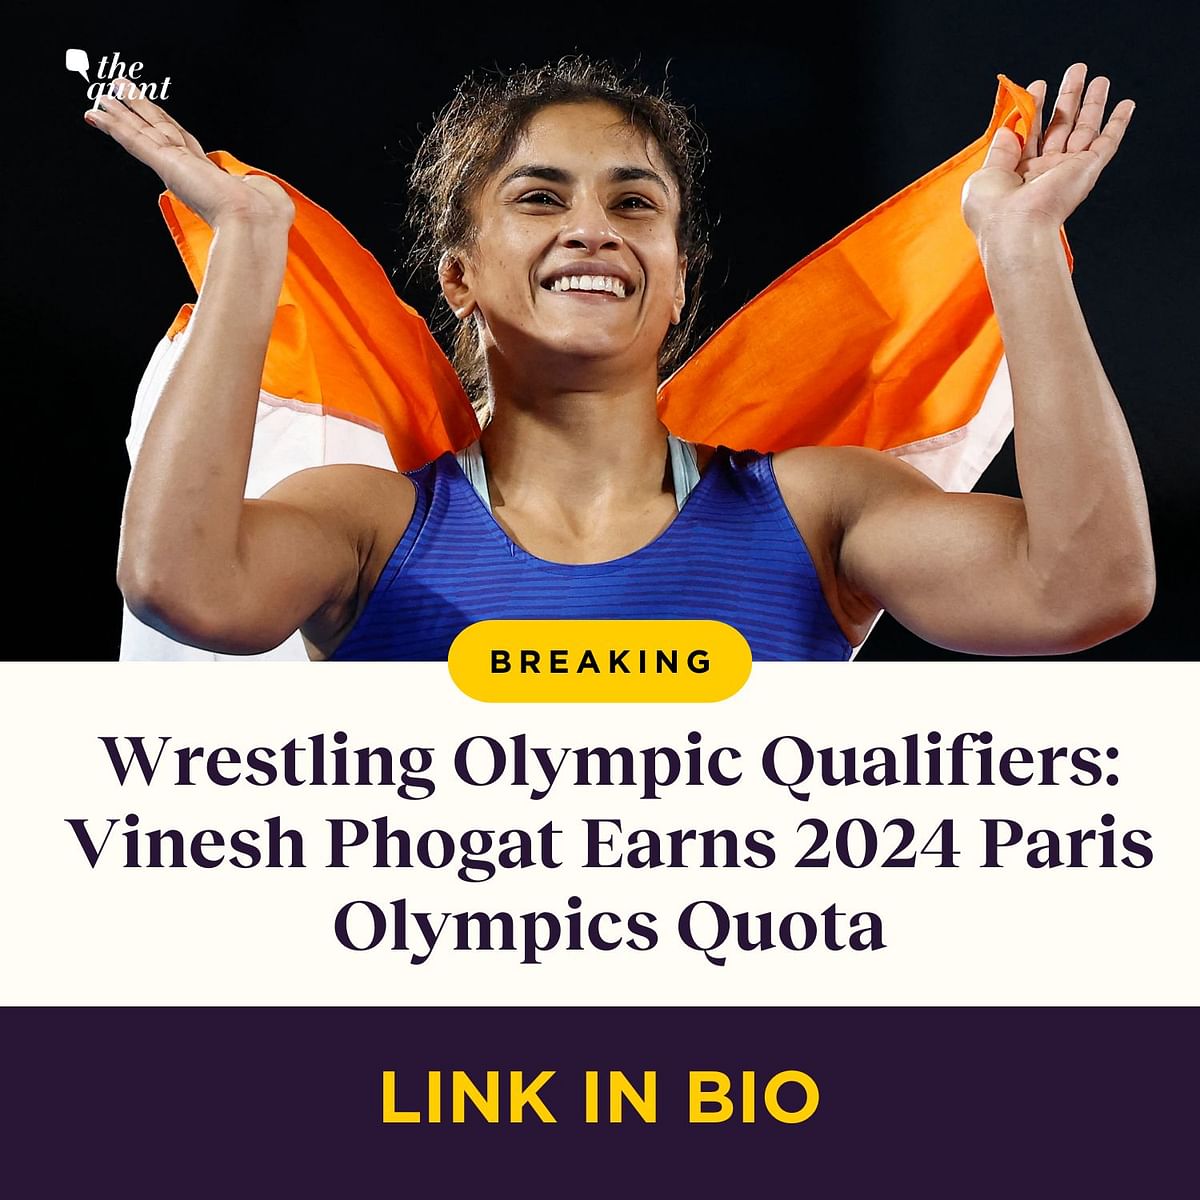 Including Vinesh Phogat, three female Indian wrestlers earned quotas for the 2024 Paris Olympics.